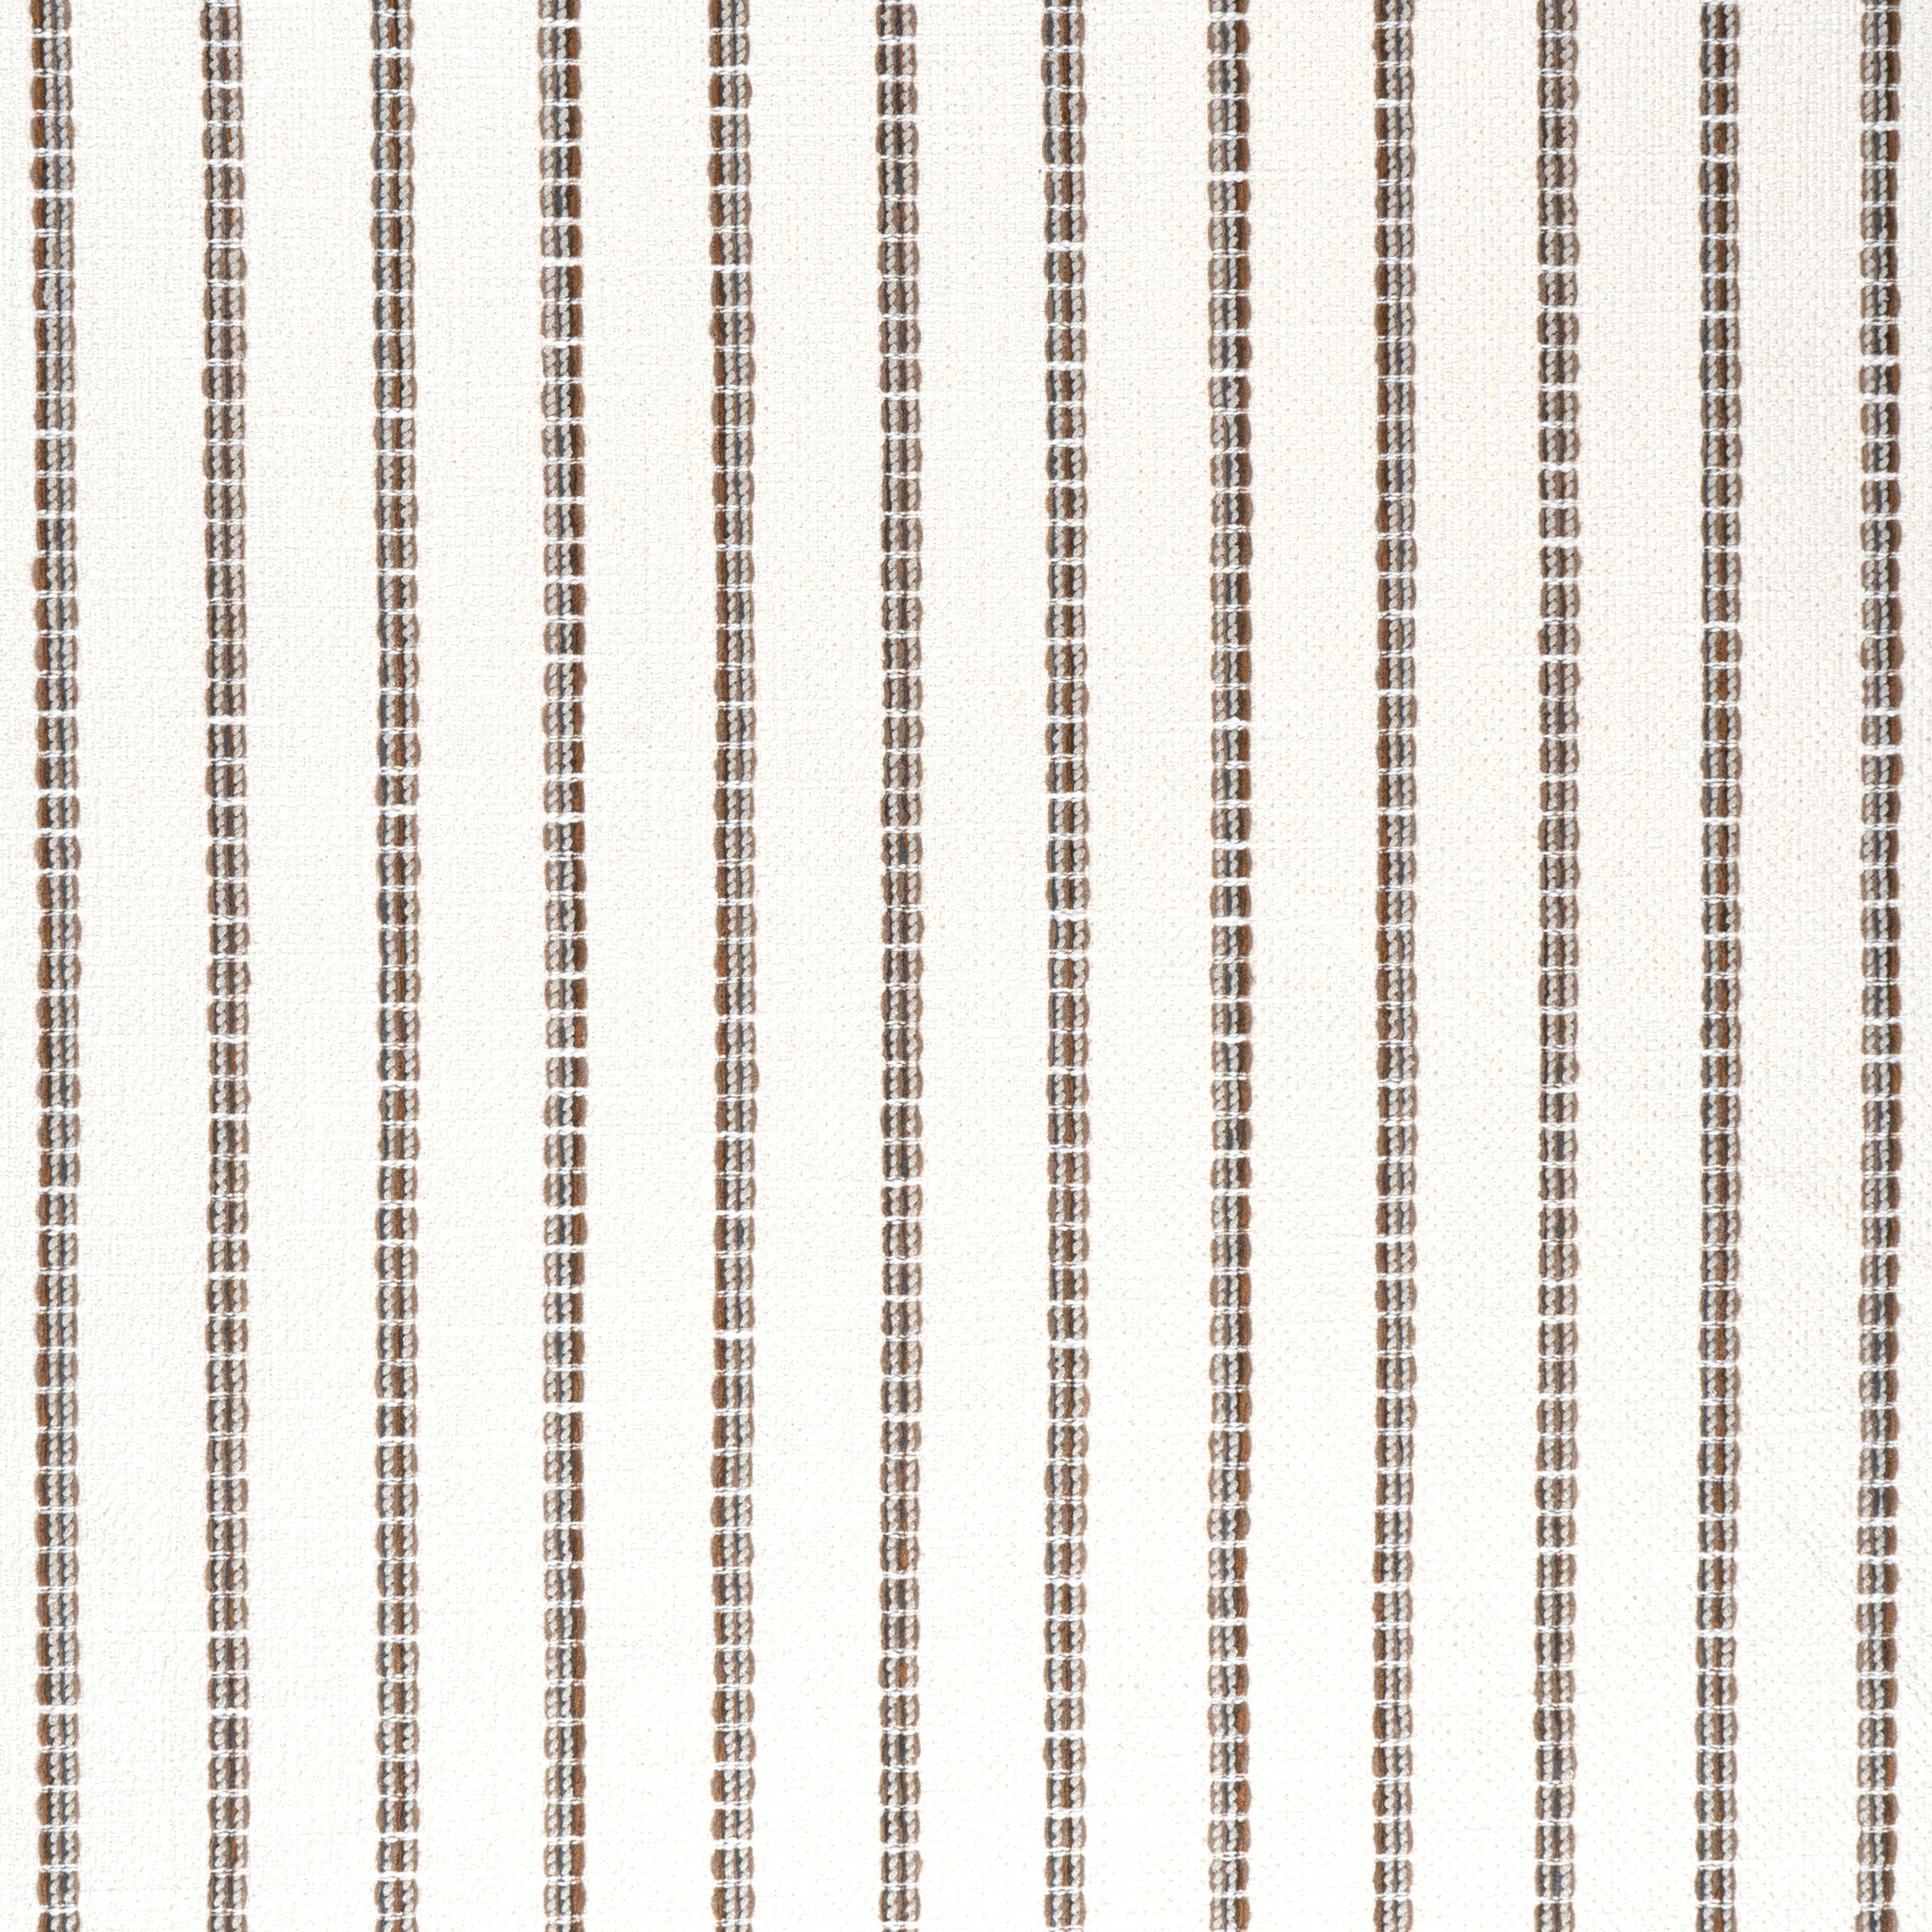 Oak Creek Stripe fabric in bark color - pattern number W78336 - by Thibaut in the  Sierra collection